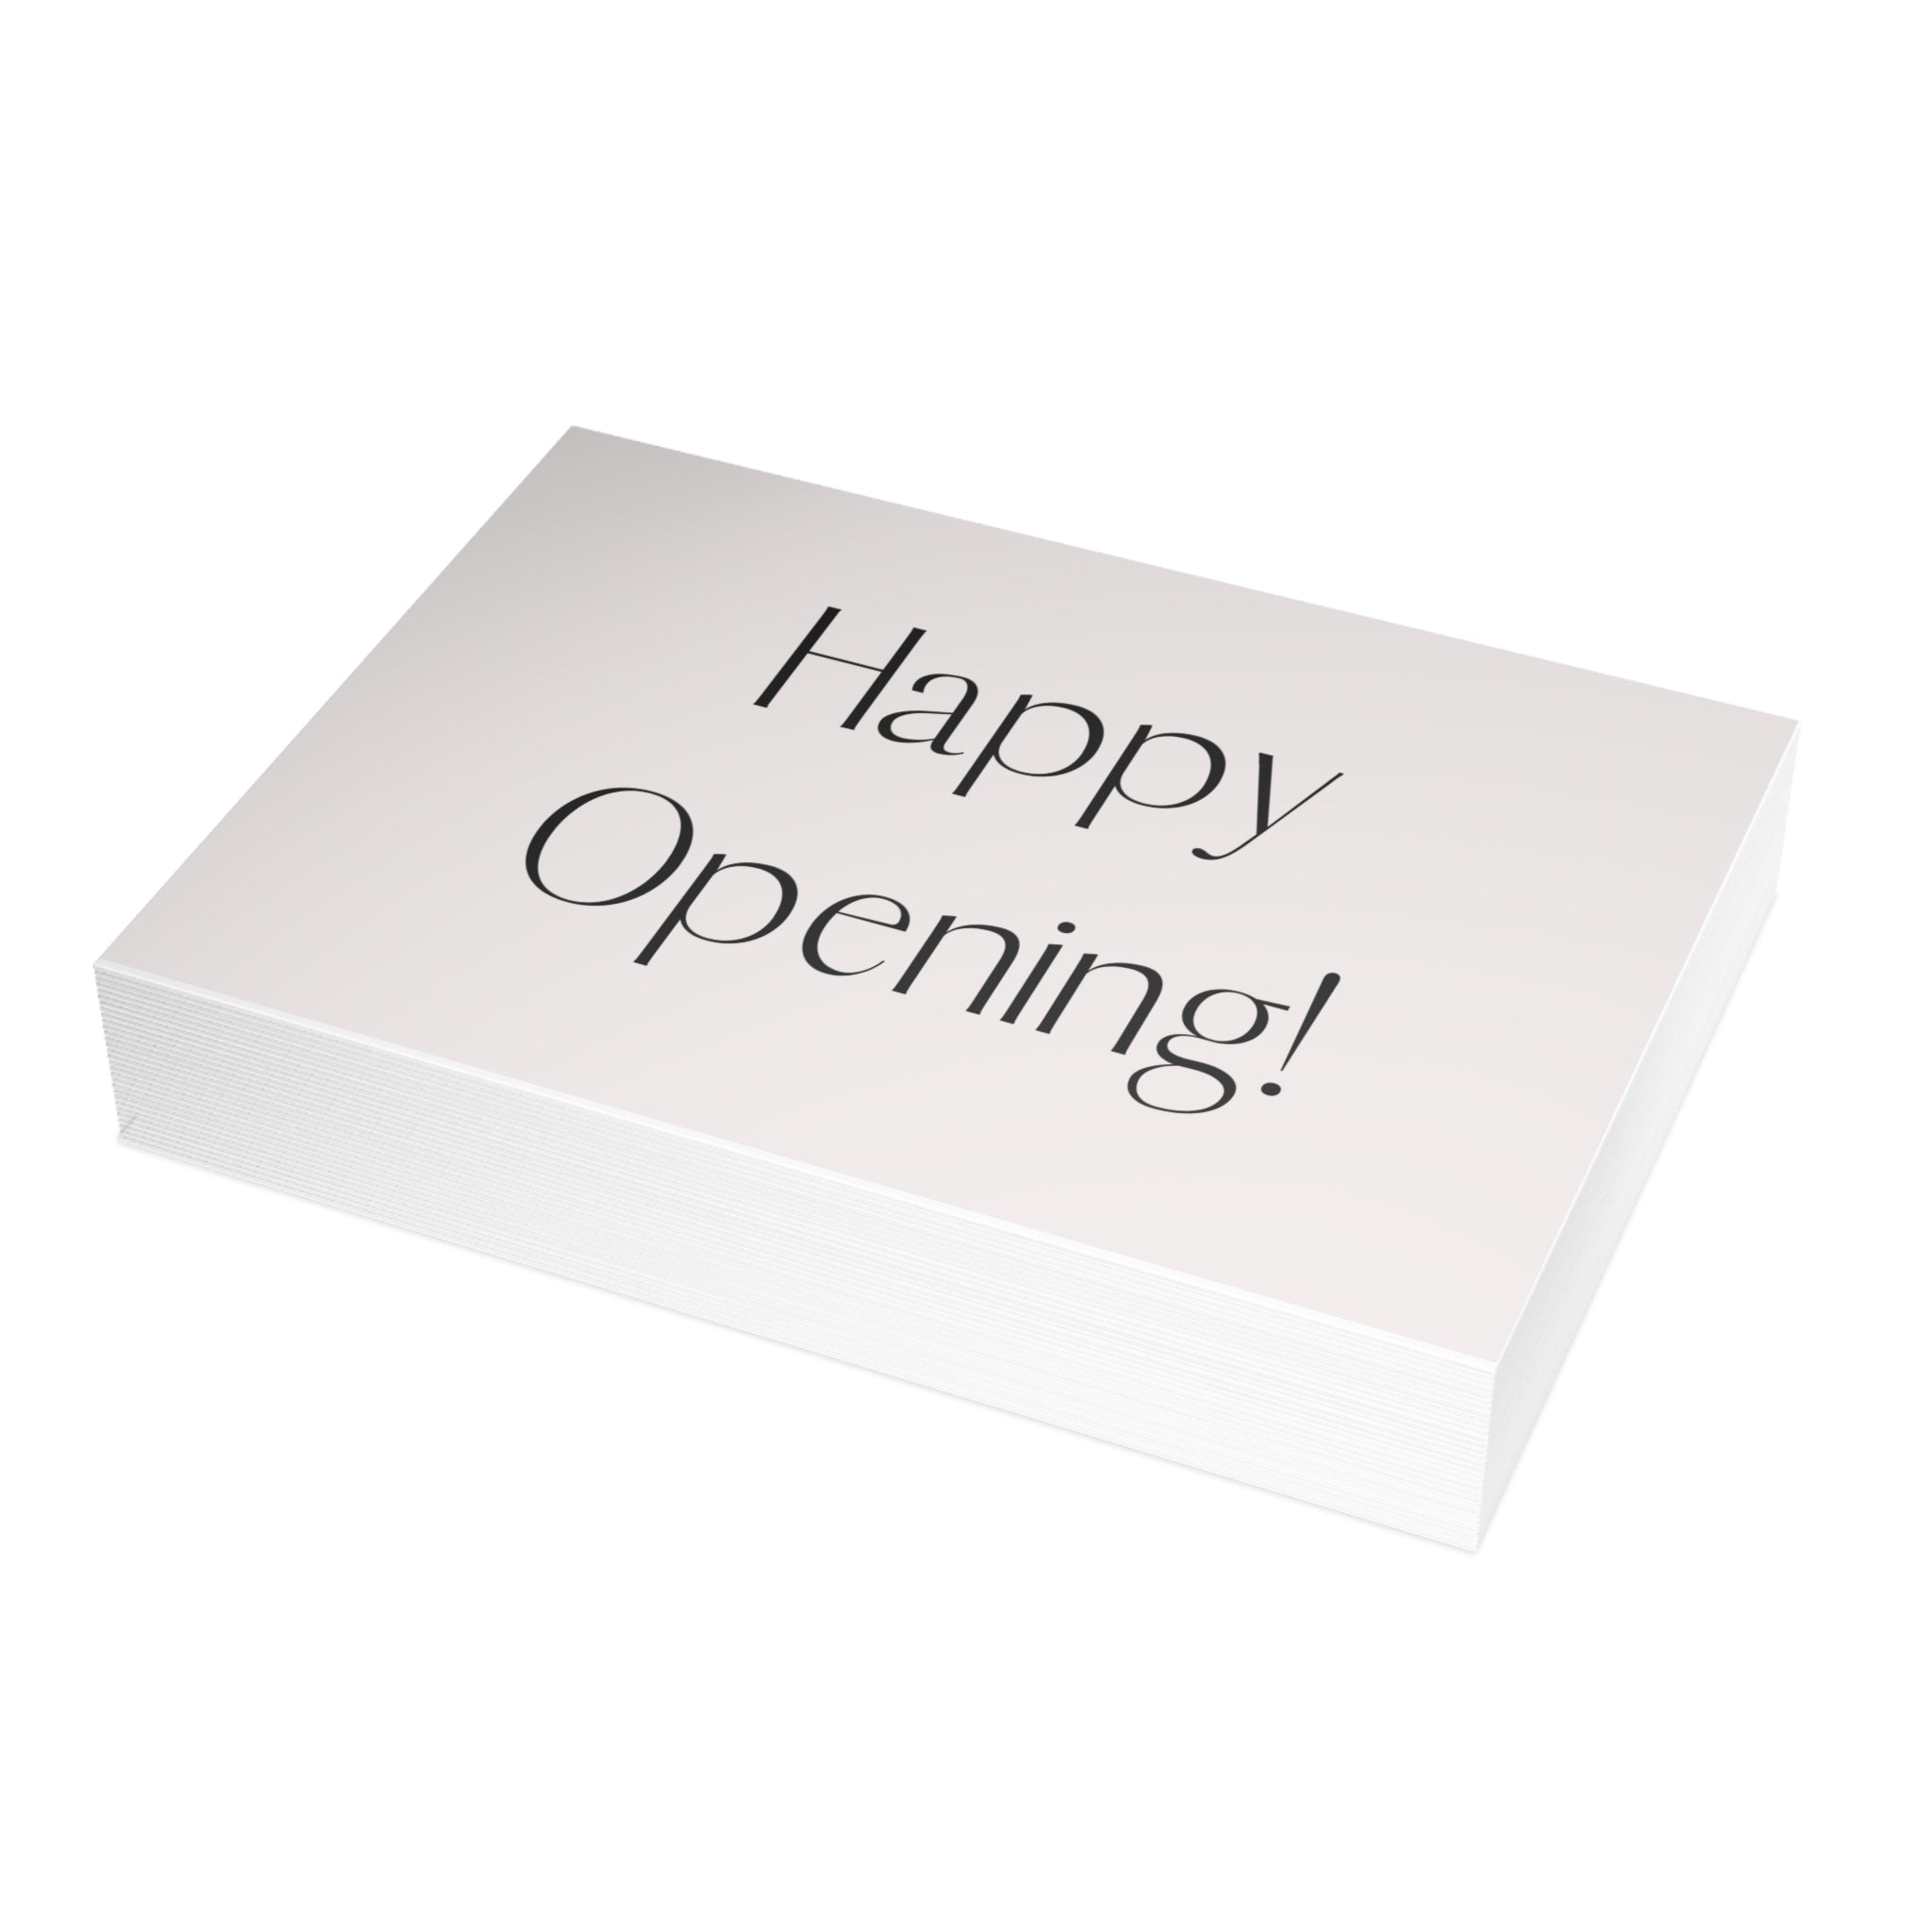 "Happy Opening!" - 30 flat cards